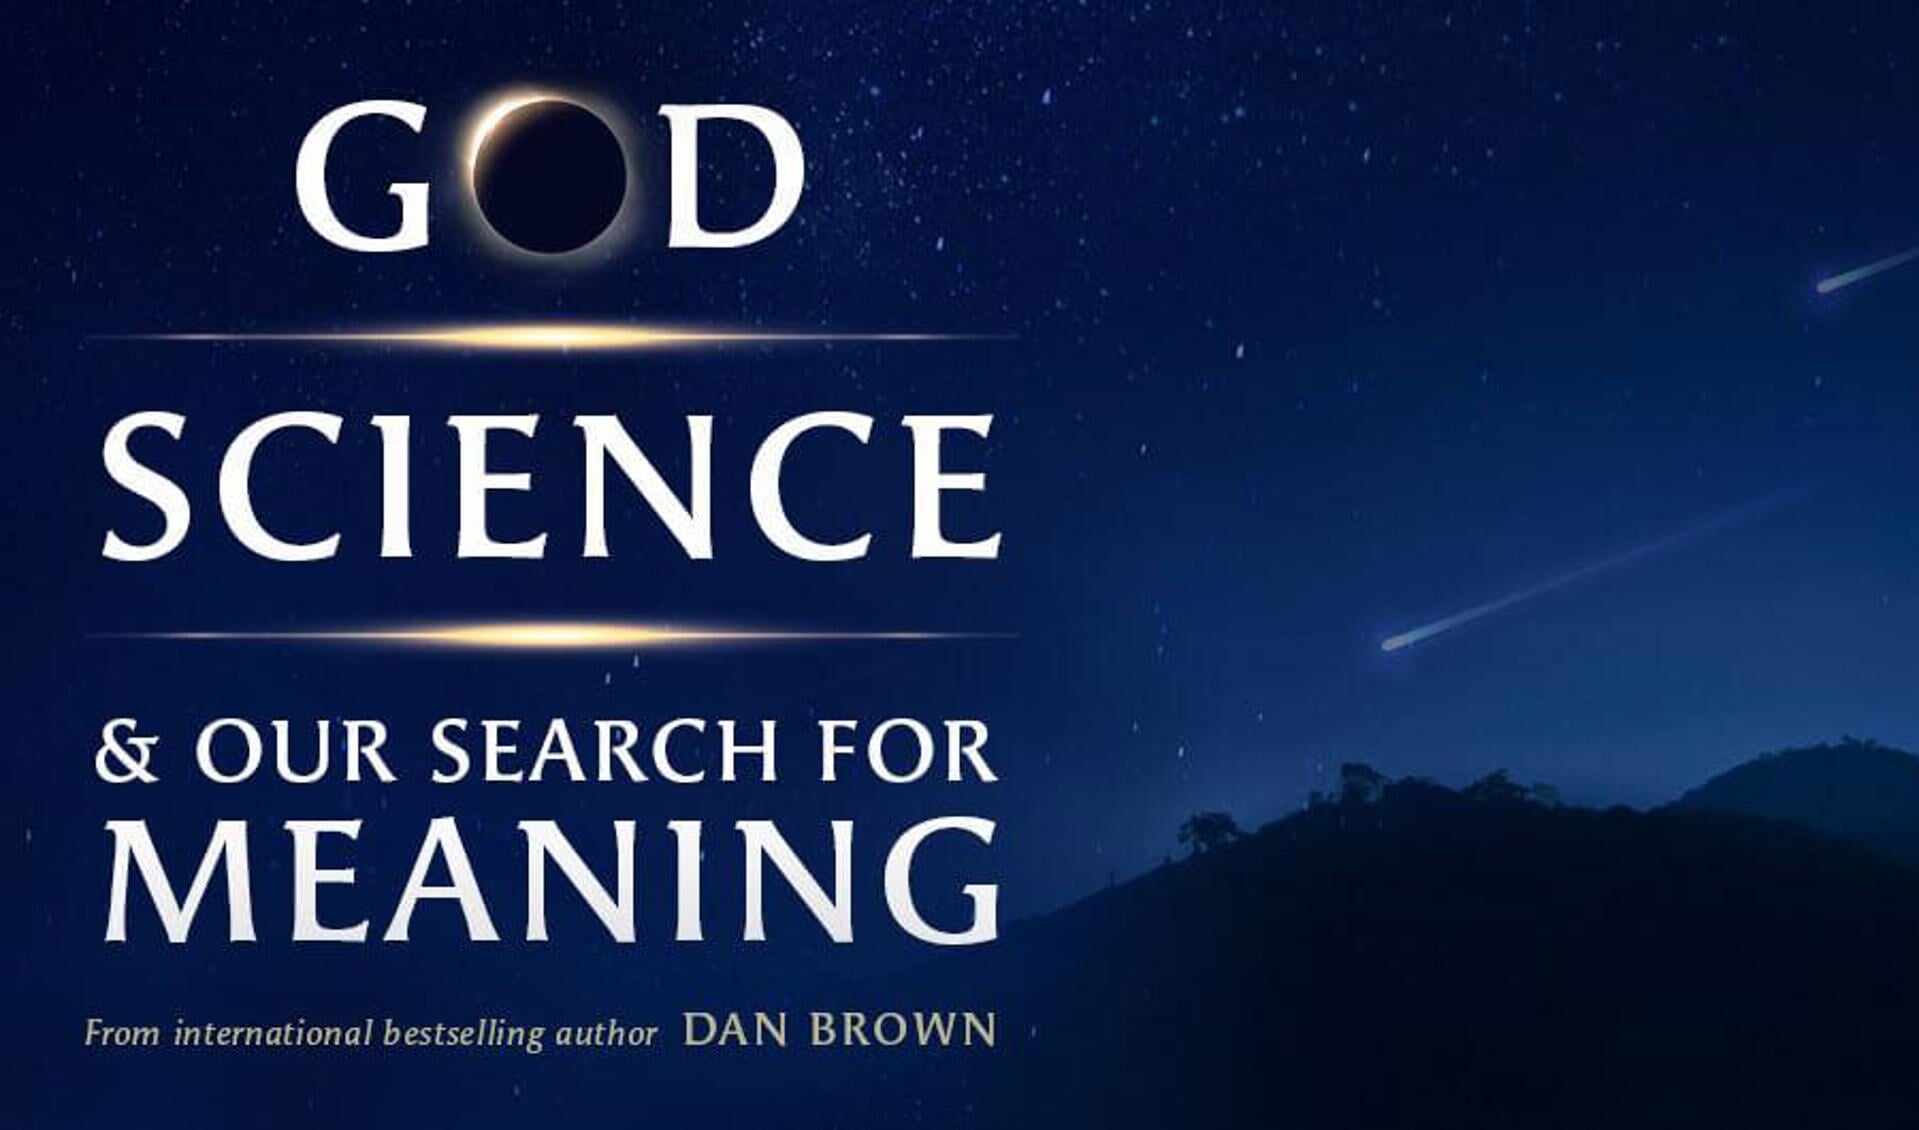 Poster met tekst 'God, Science and our Search for Meaning, from international bestselling author Dan Brown'